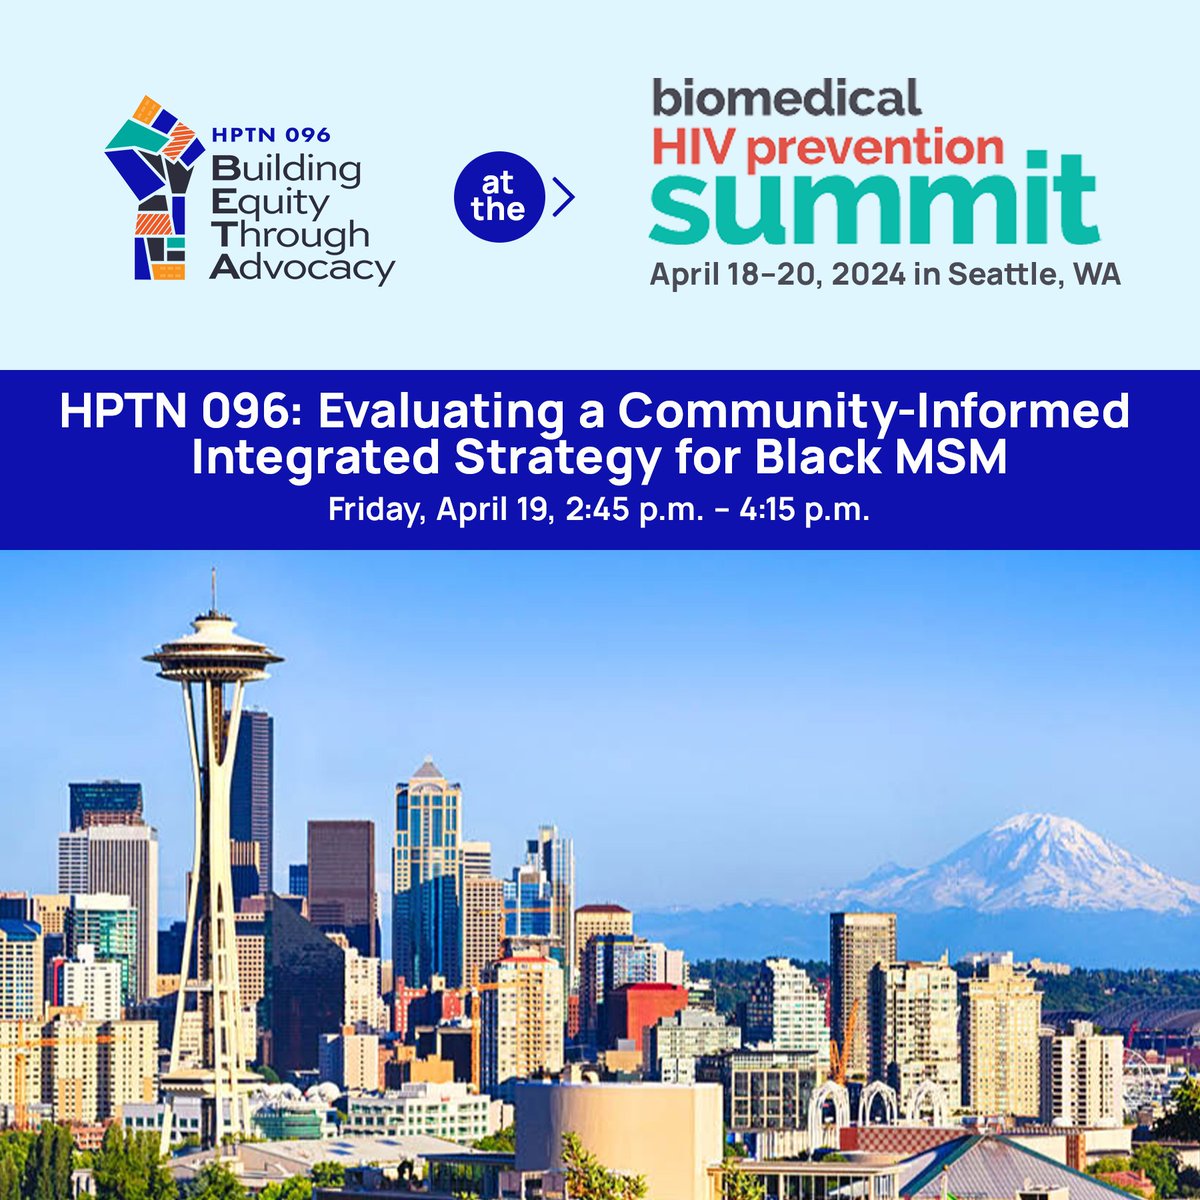 🌟 Join us at the 2024 Biomedical HIV Prevention Summit in Seattle! 🔹 PrEP in Black America Pre-Conference 🔹 HPTN 096:Community-Informed Integrated Strategy for Black MSM 🔹 Visit us at Booth #201 for info! 🔗 More details: biomedicalhivsummit.org/agenda #HIVPrevention #HPTN096